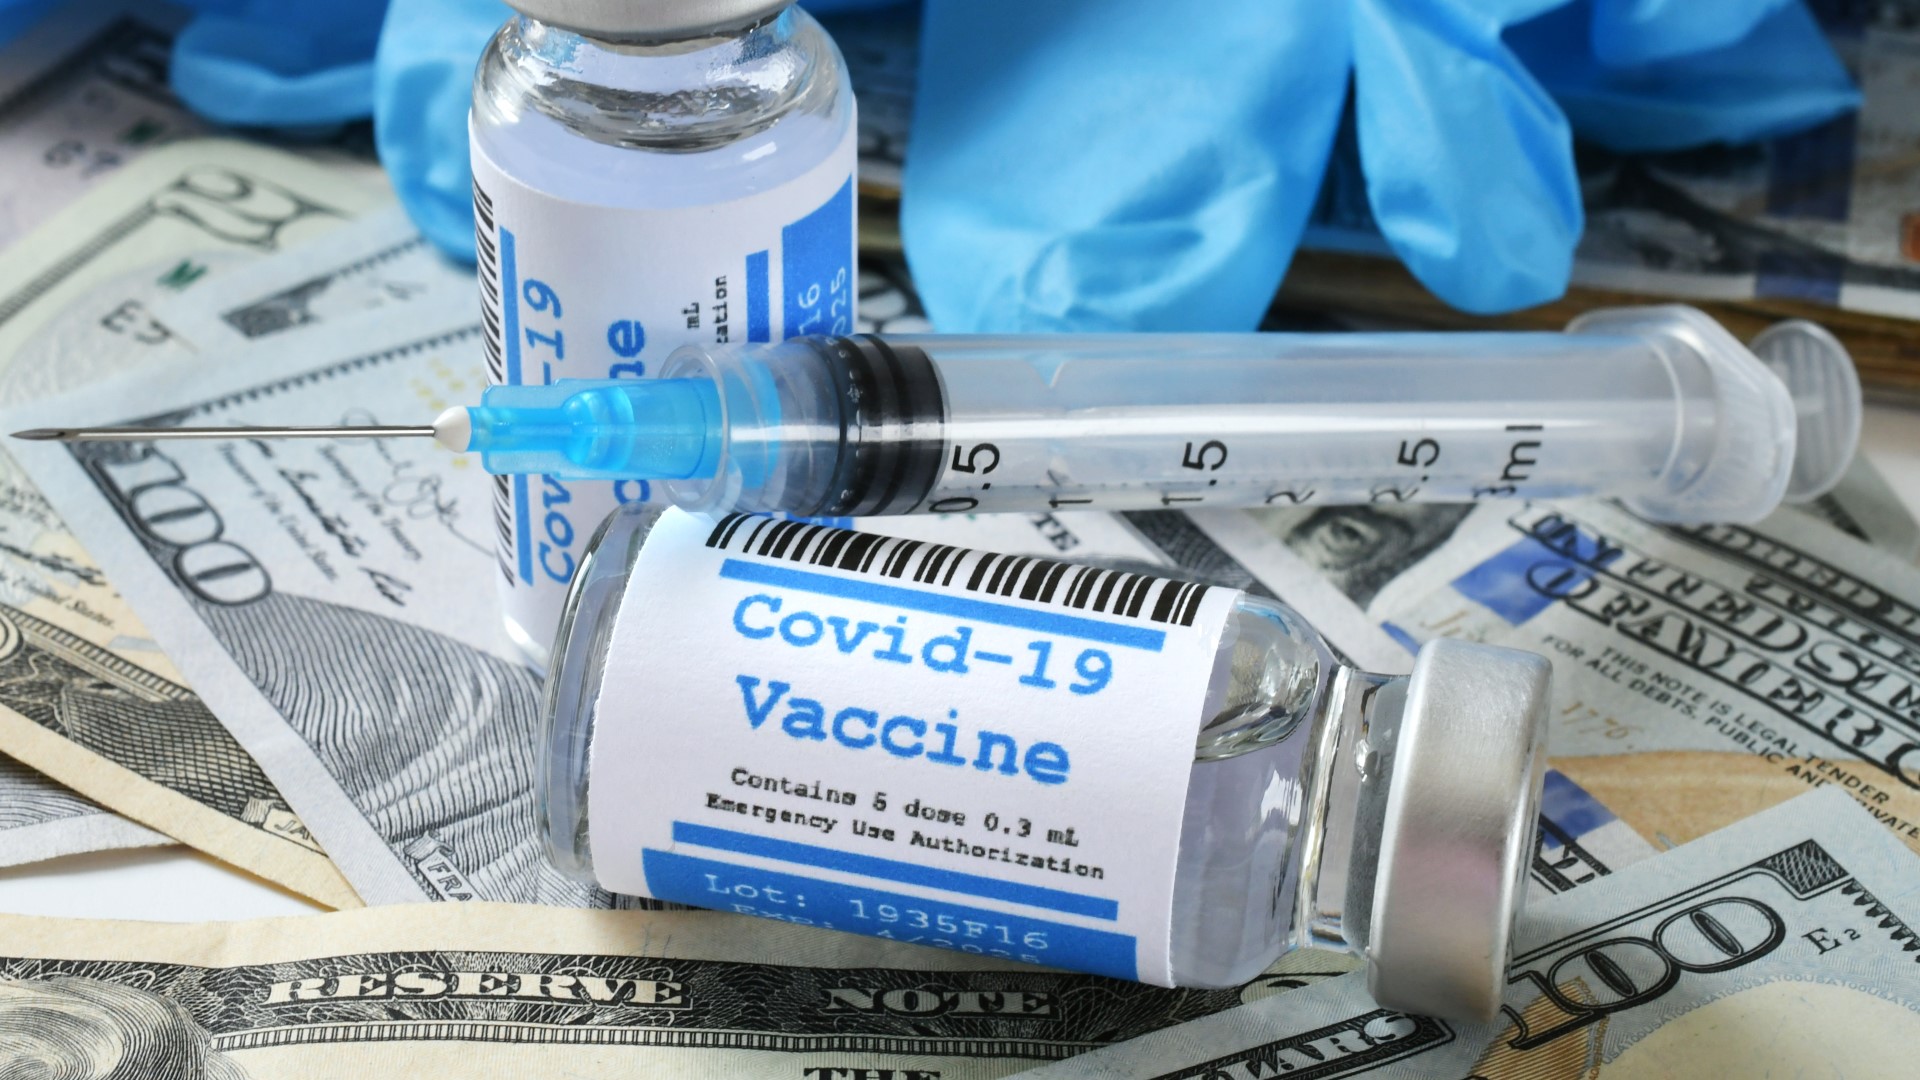 A school in Anderson County, South Carolina, is offering students $100 to get the COVID-19 vaccine.